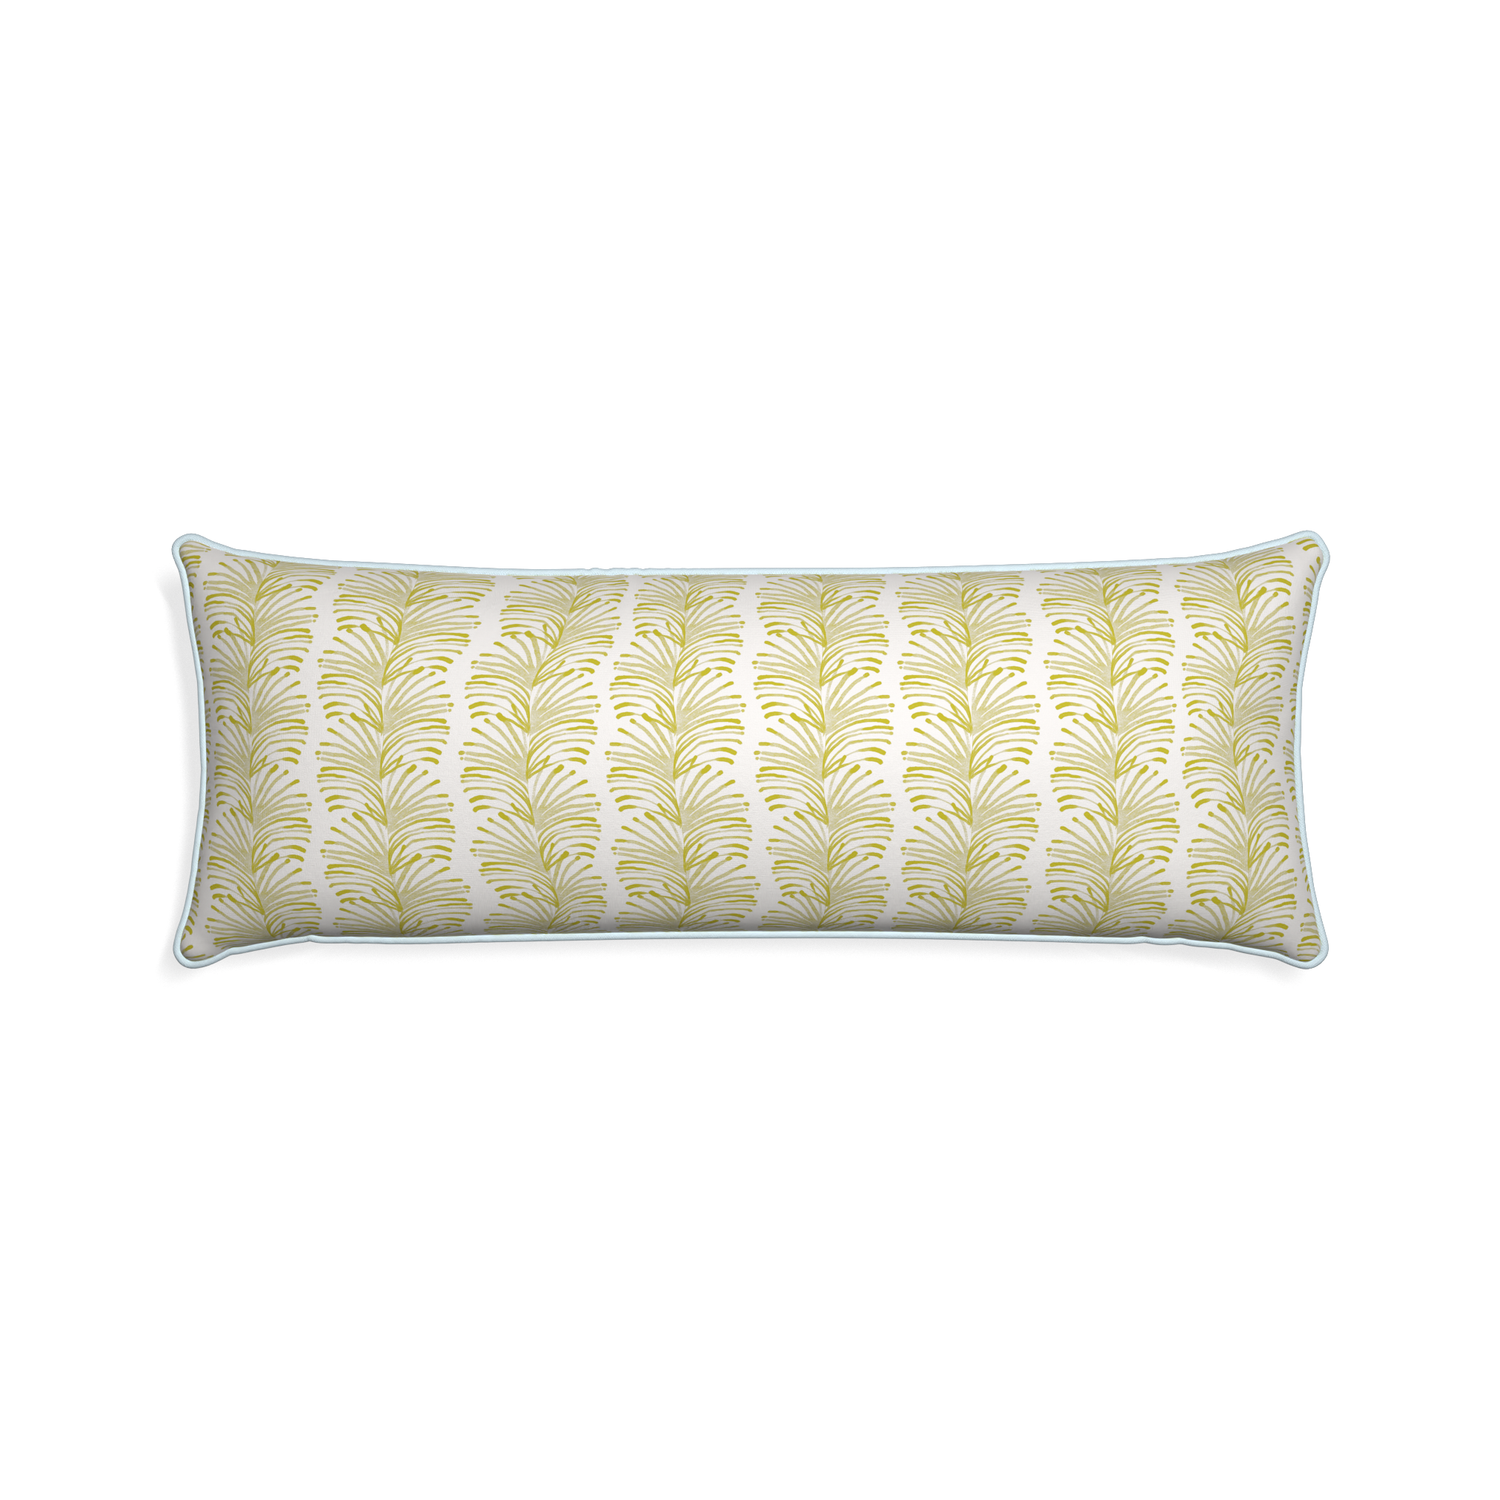 Xl-lumbar emma chartreuse custom yellow stripe chartreusepillow with powder piping on white background